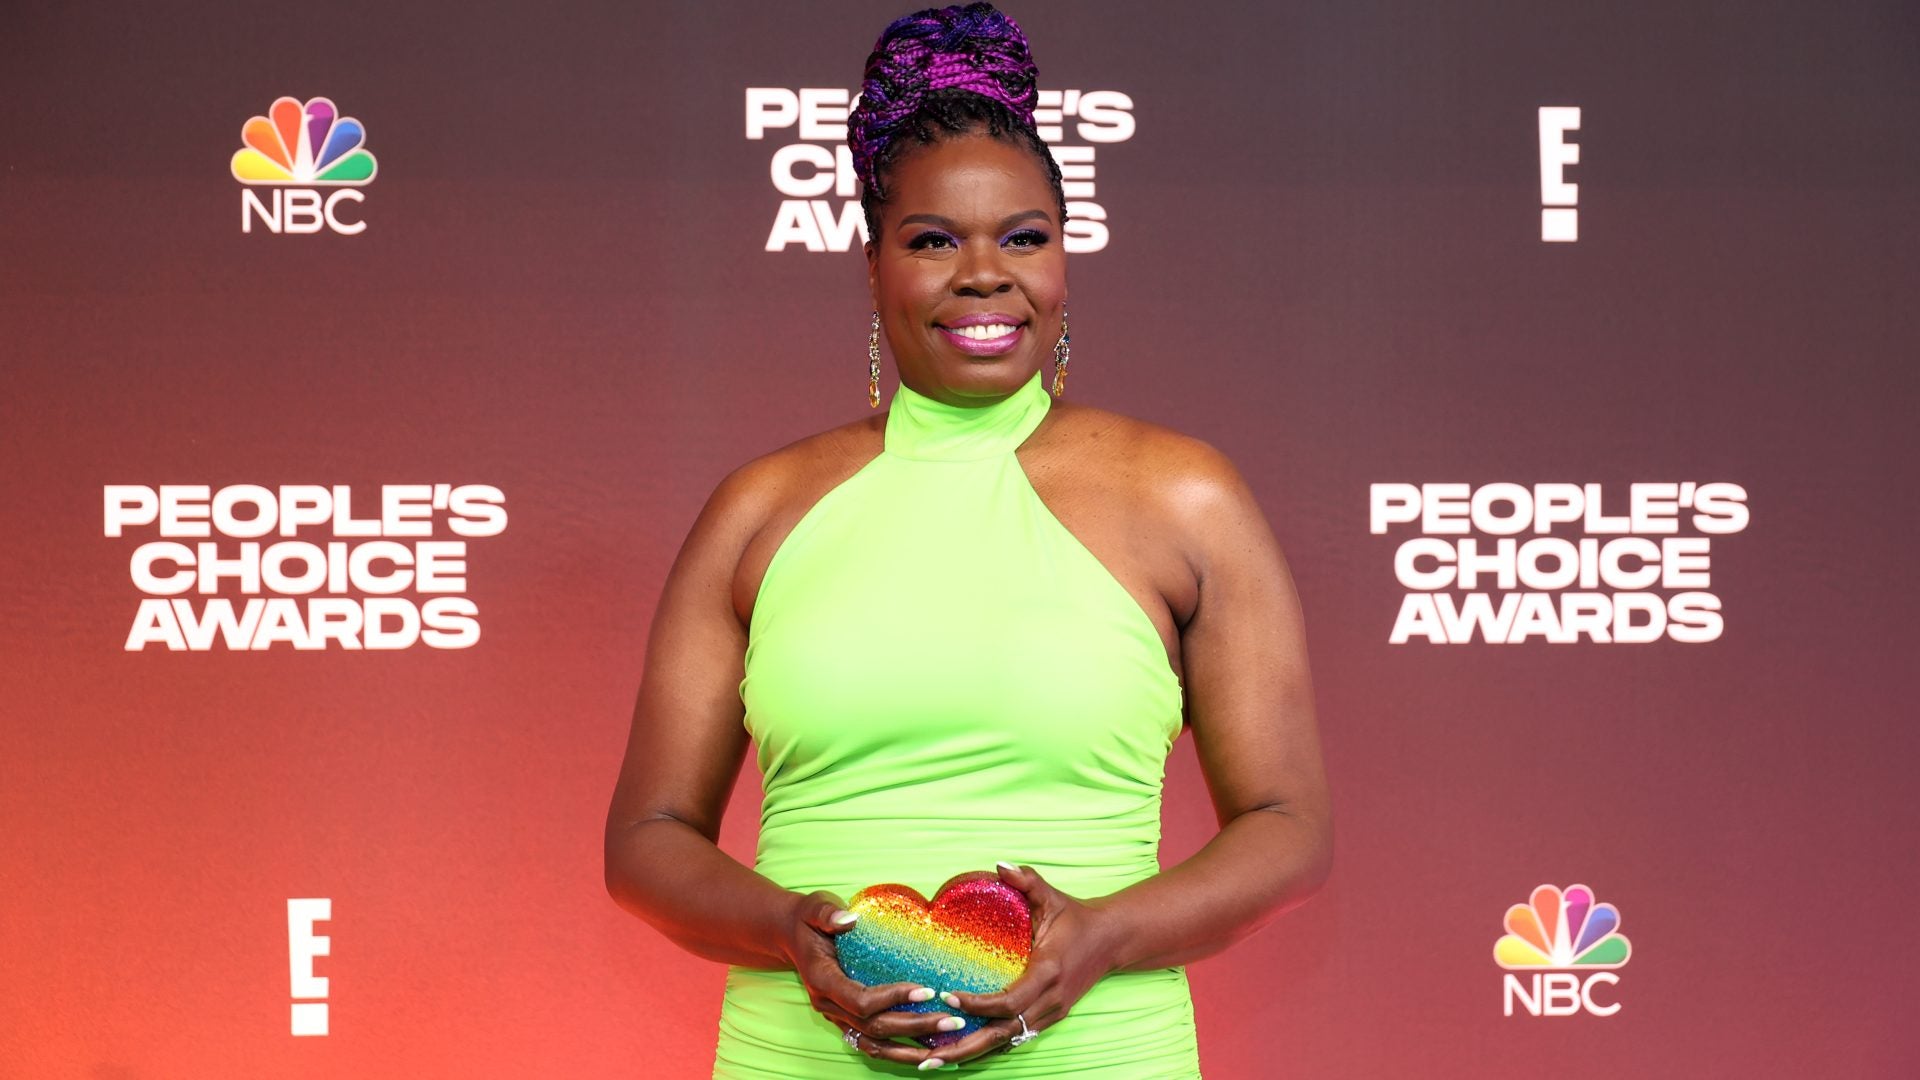 Leslie Jones Quits Olympic Commentary: "I'm Tired Of Fighting"